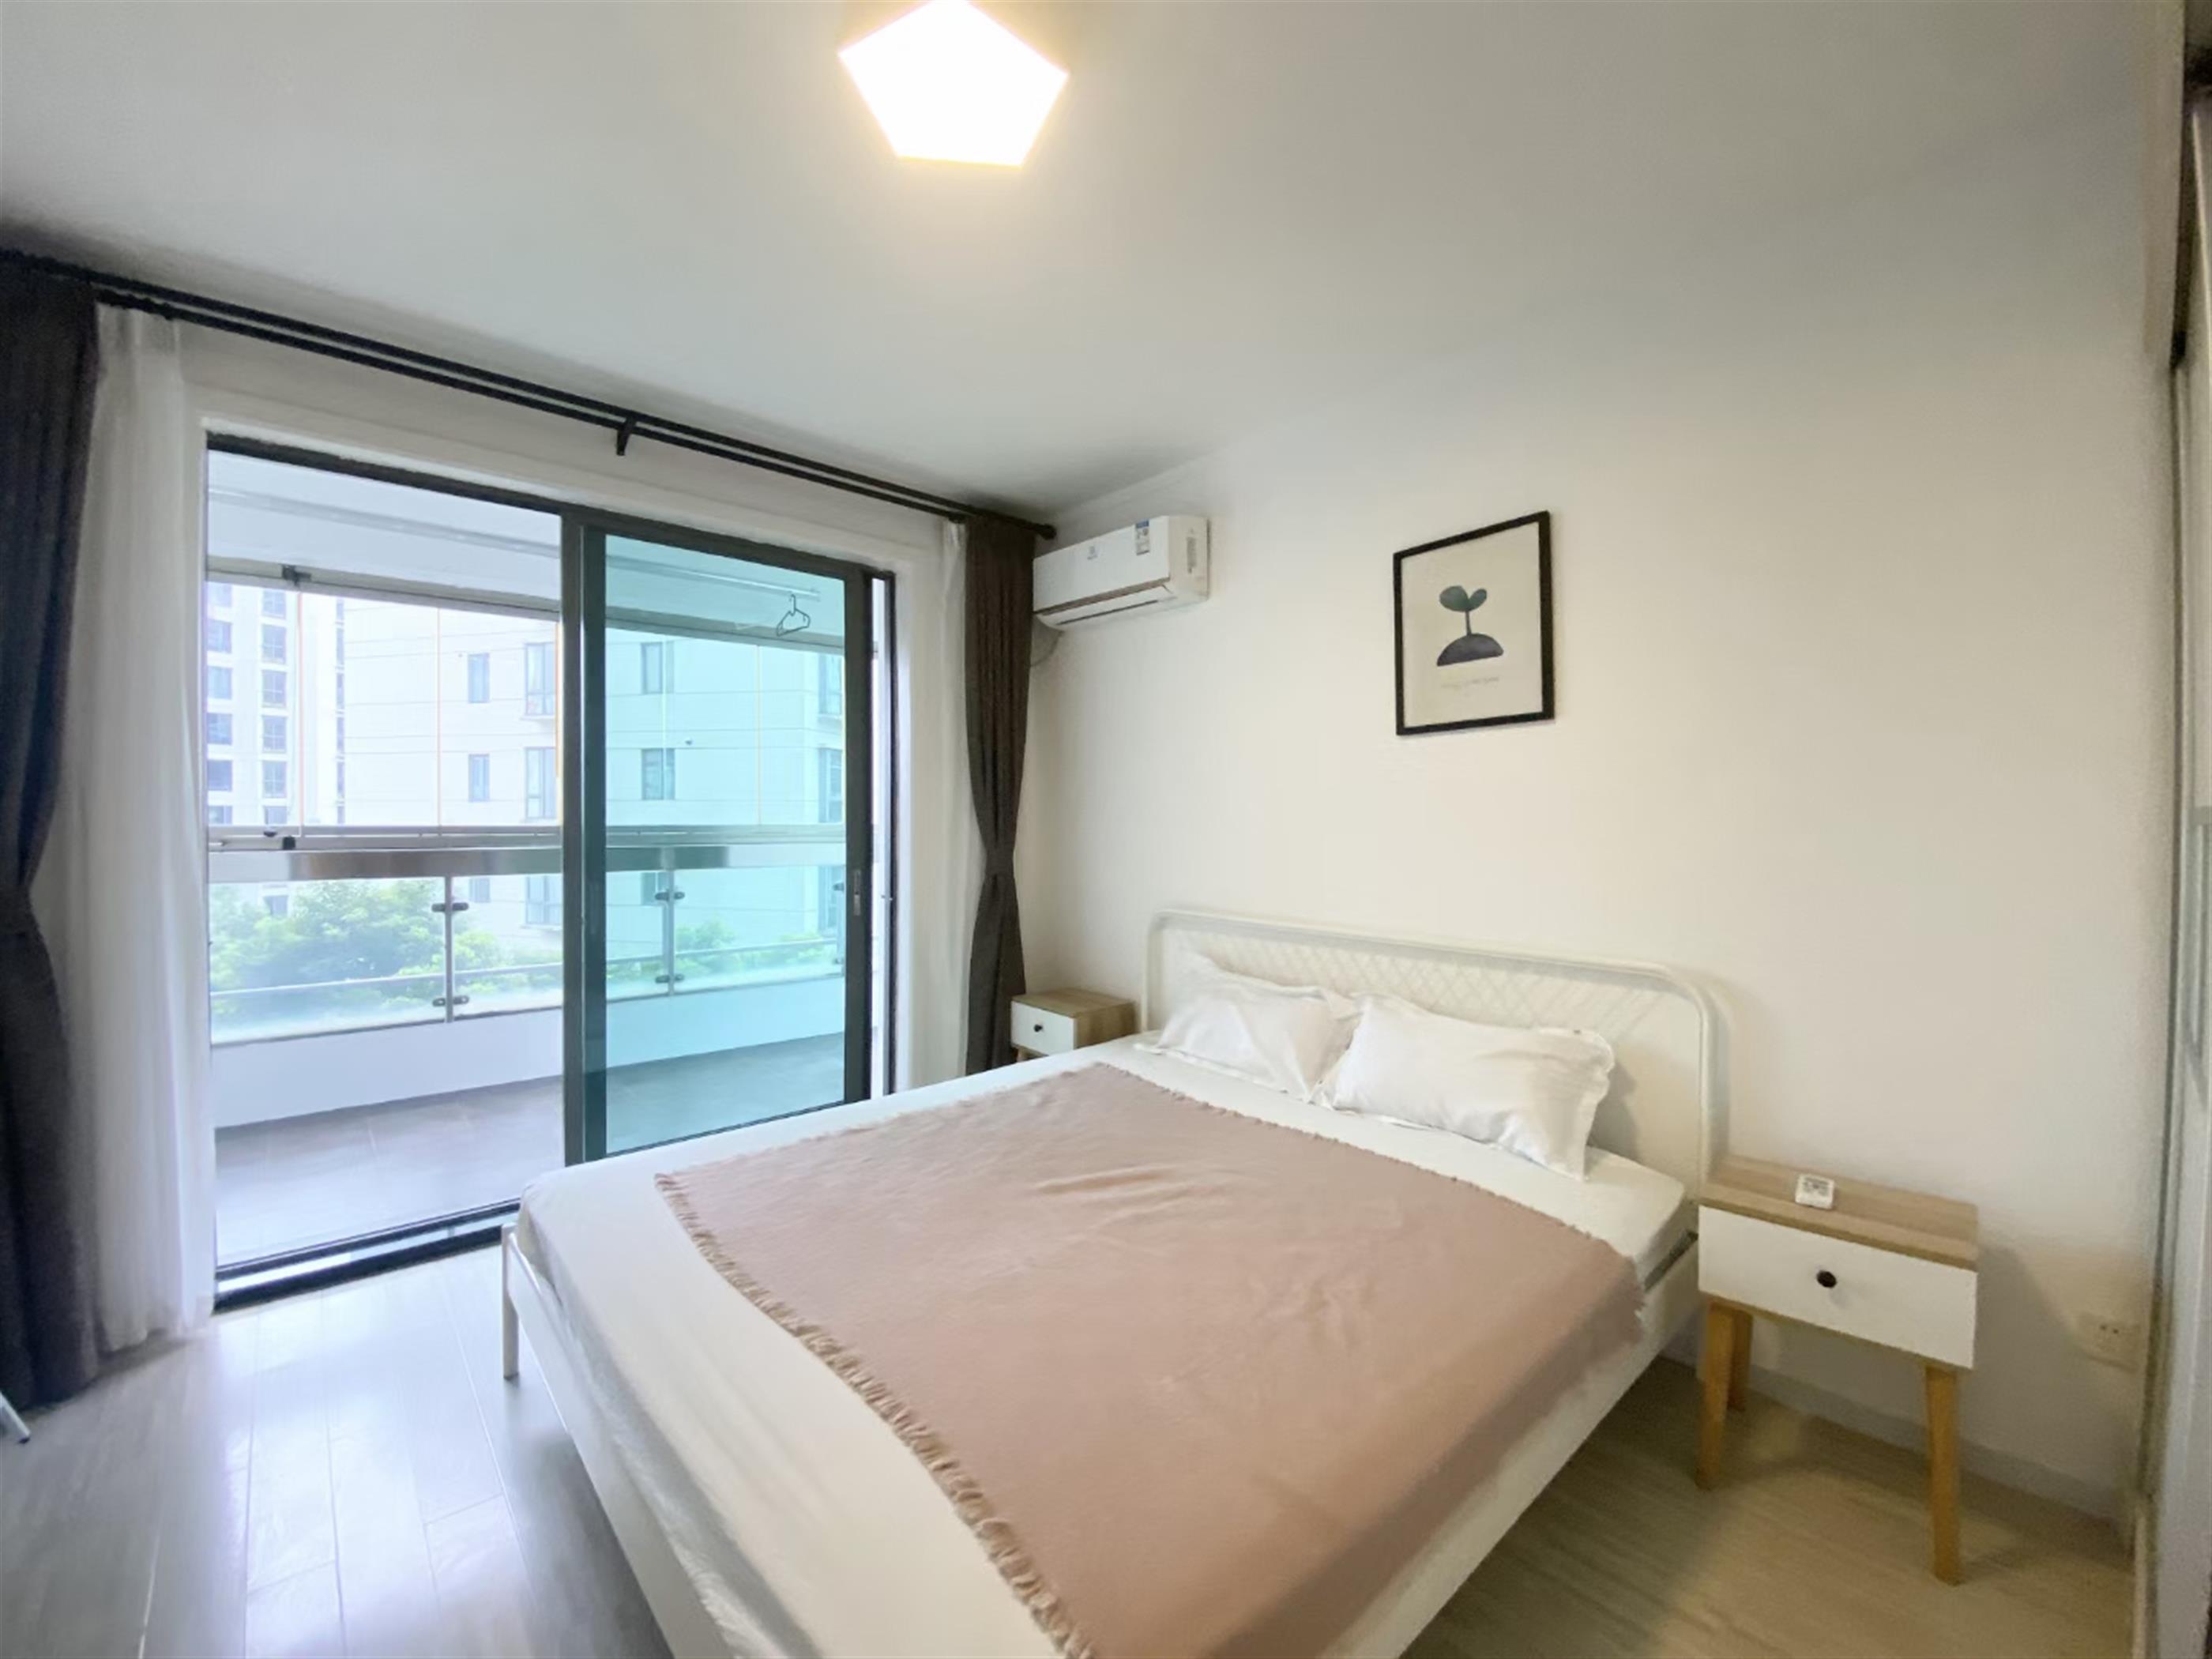 bright bedroom Spacious Newly Renovated 2BR Top of City Apt Nr Ln 2/12/13 for Rent in Shanghai